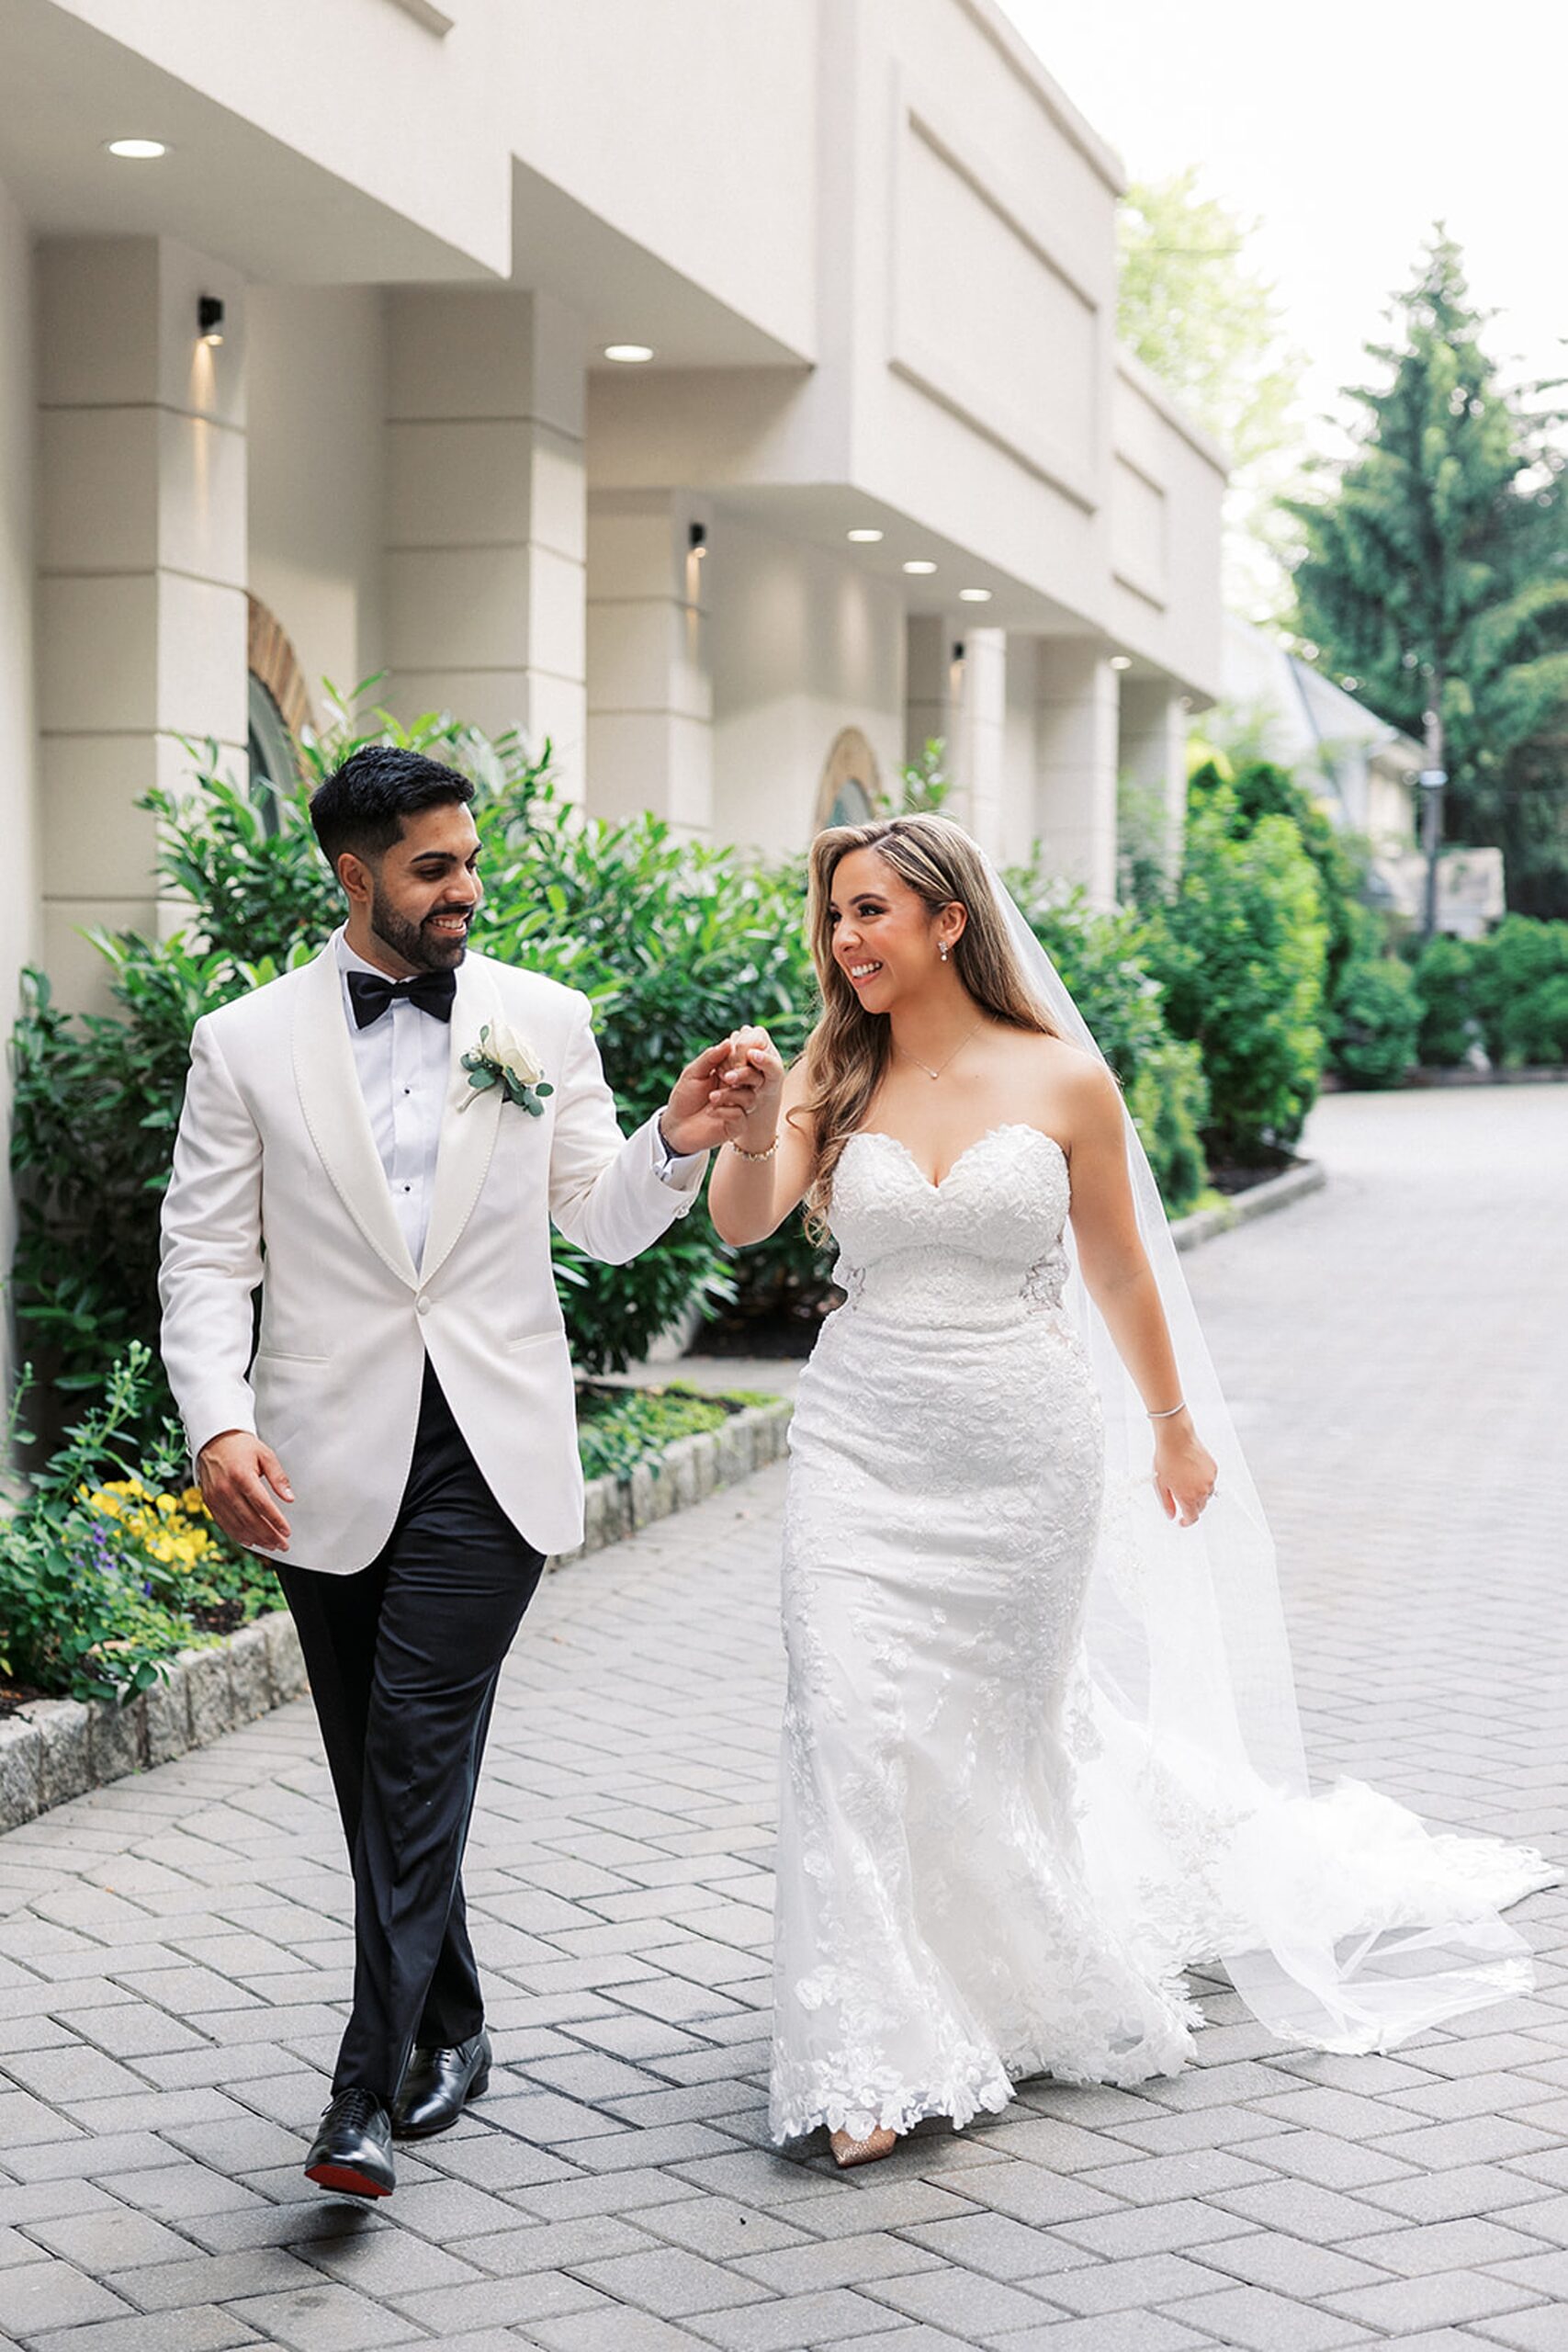 A groom in a white tuxedo walks his bride through a garden on a stone path while holding her hand